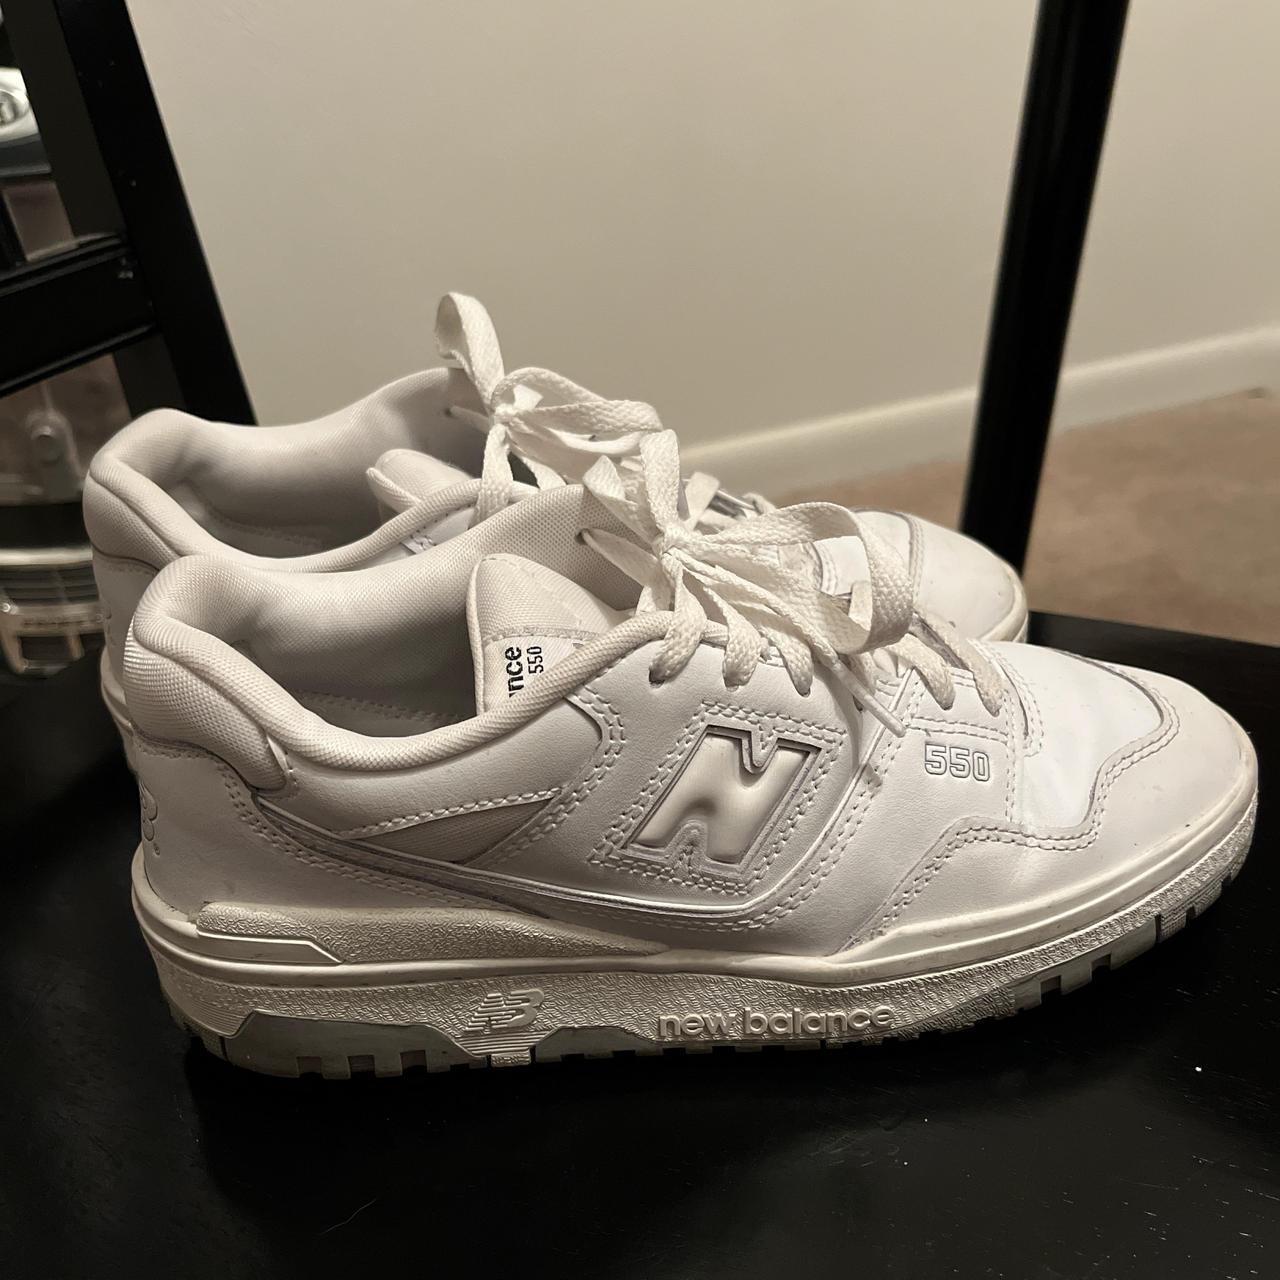 NEW BALANCE MESH LINED! All Motion 4-Way Stretch - Depop